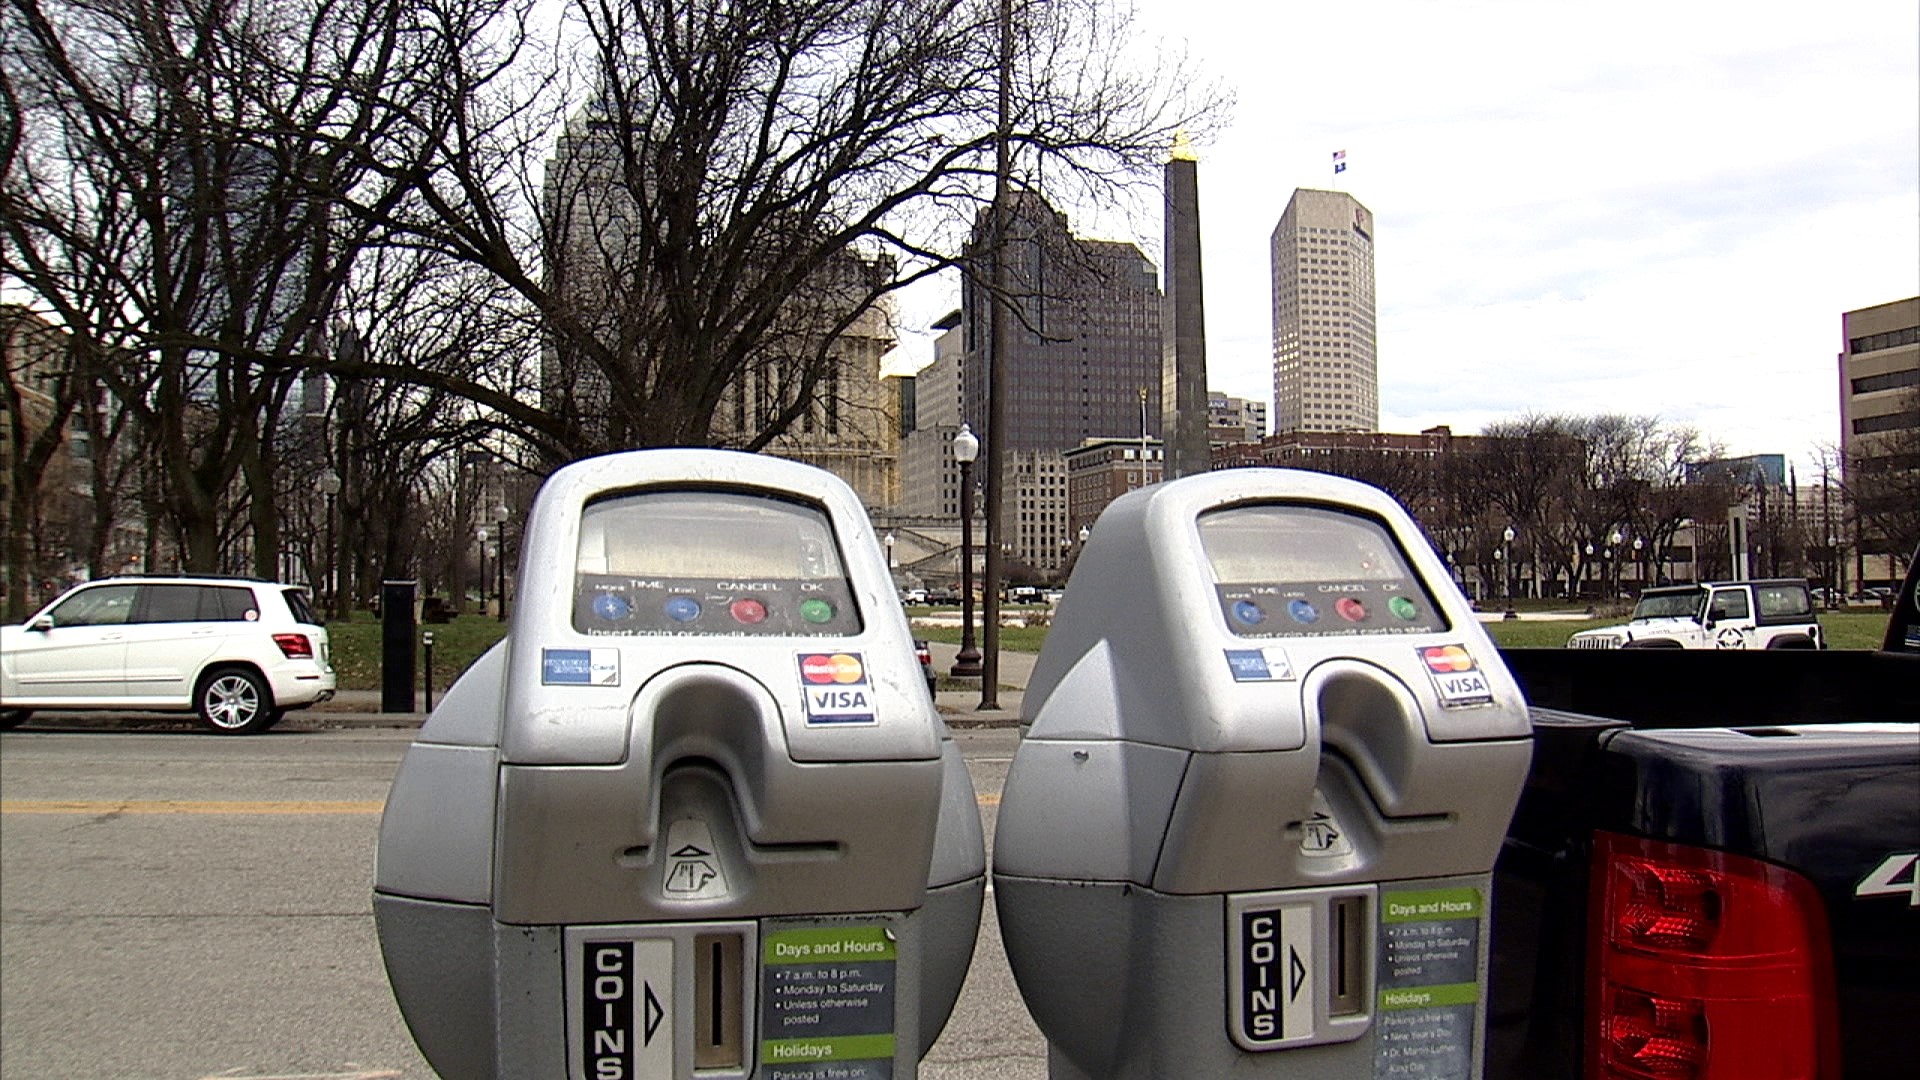 Meter rates will change from $1.50 to $1.75 per hour beginning April 1, 2022.